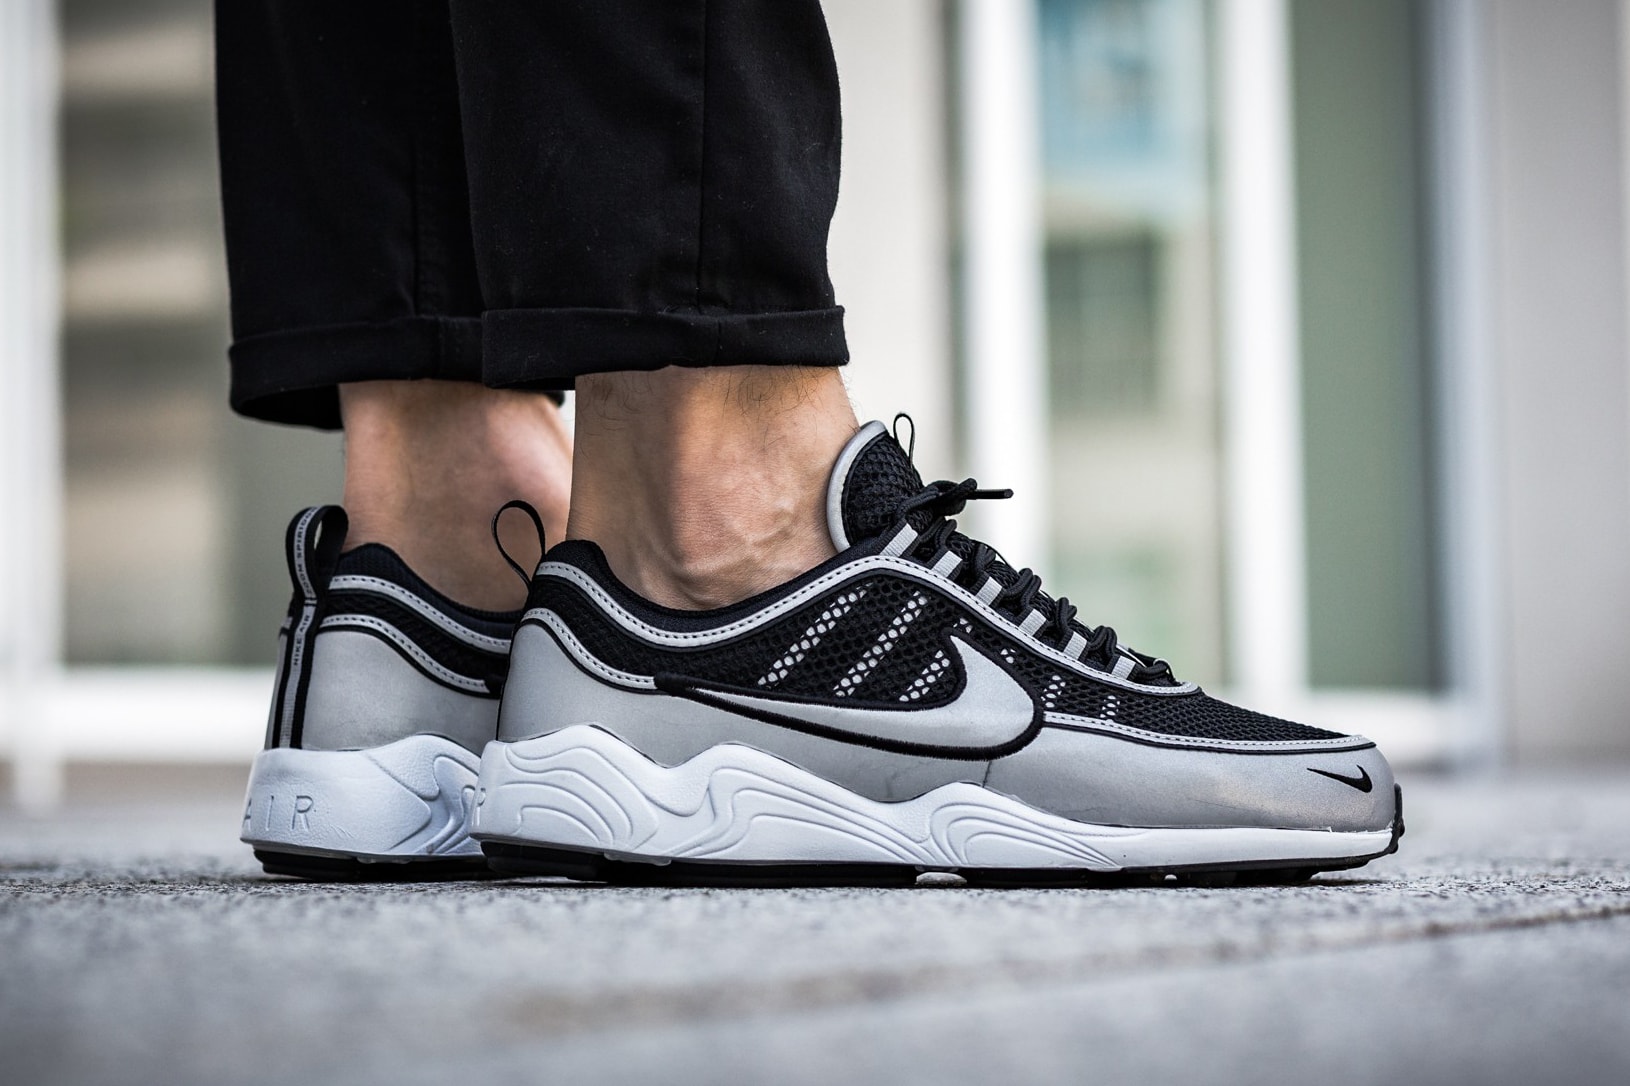 Nike Air Zoom Spiridon Reflective Silver Black White Sneakers Shoes Footwear 2017 September Release Date Info Titolo 3M